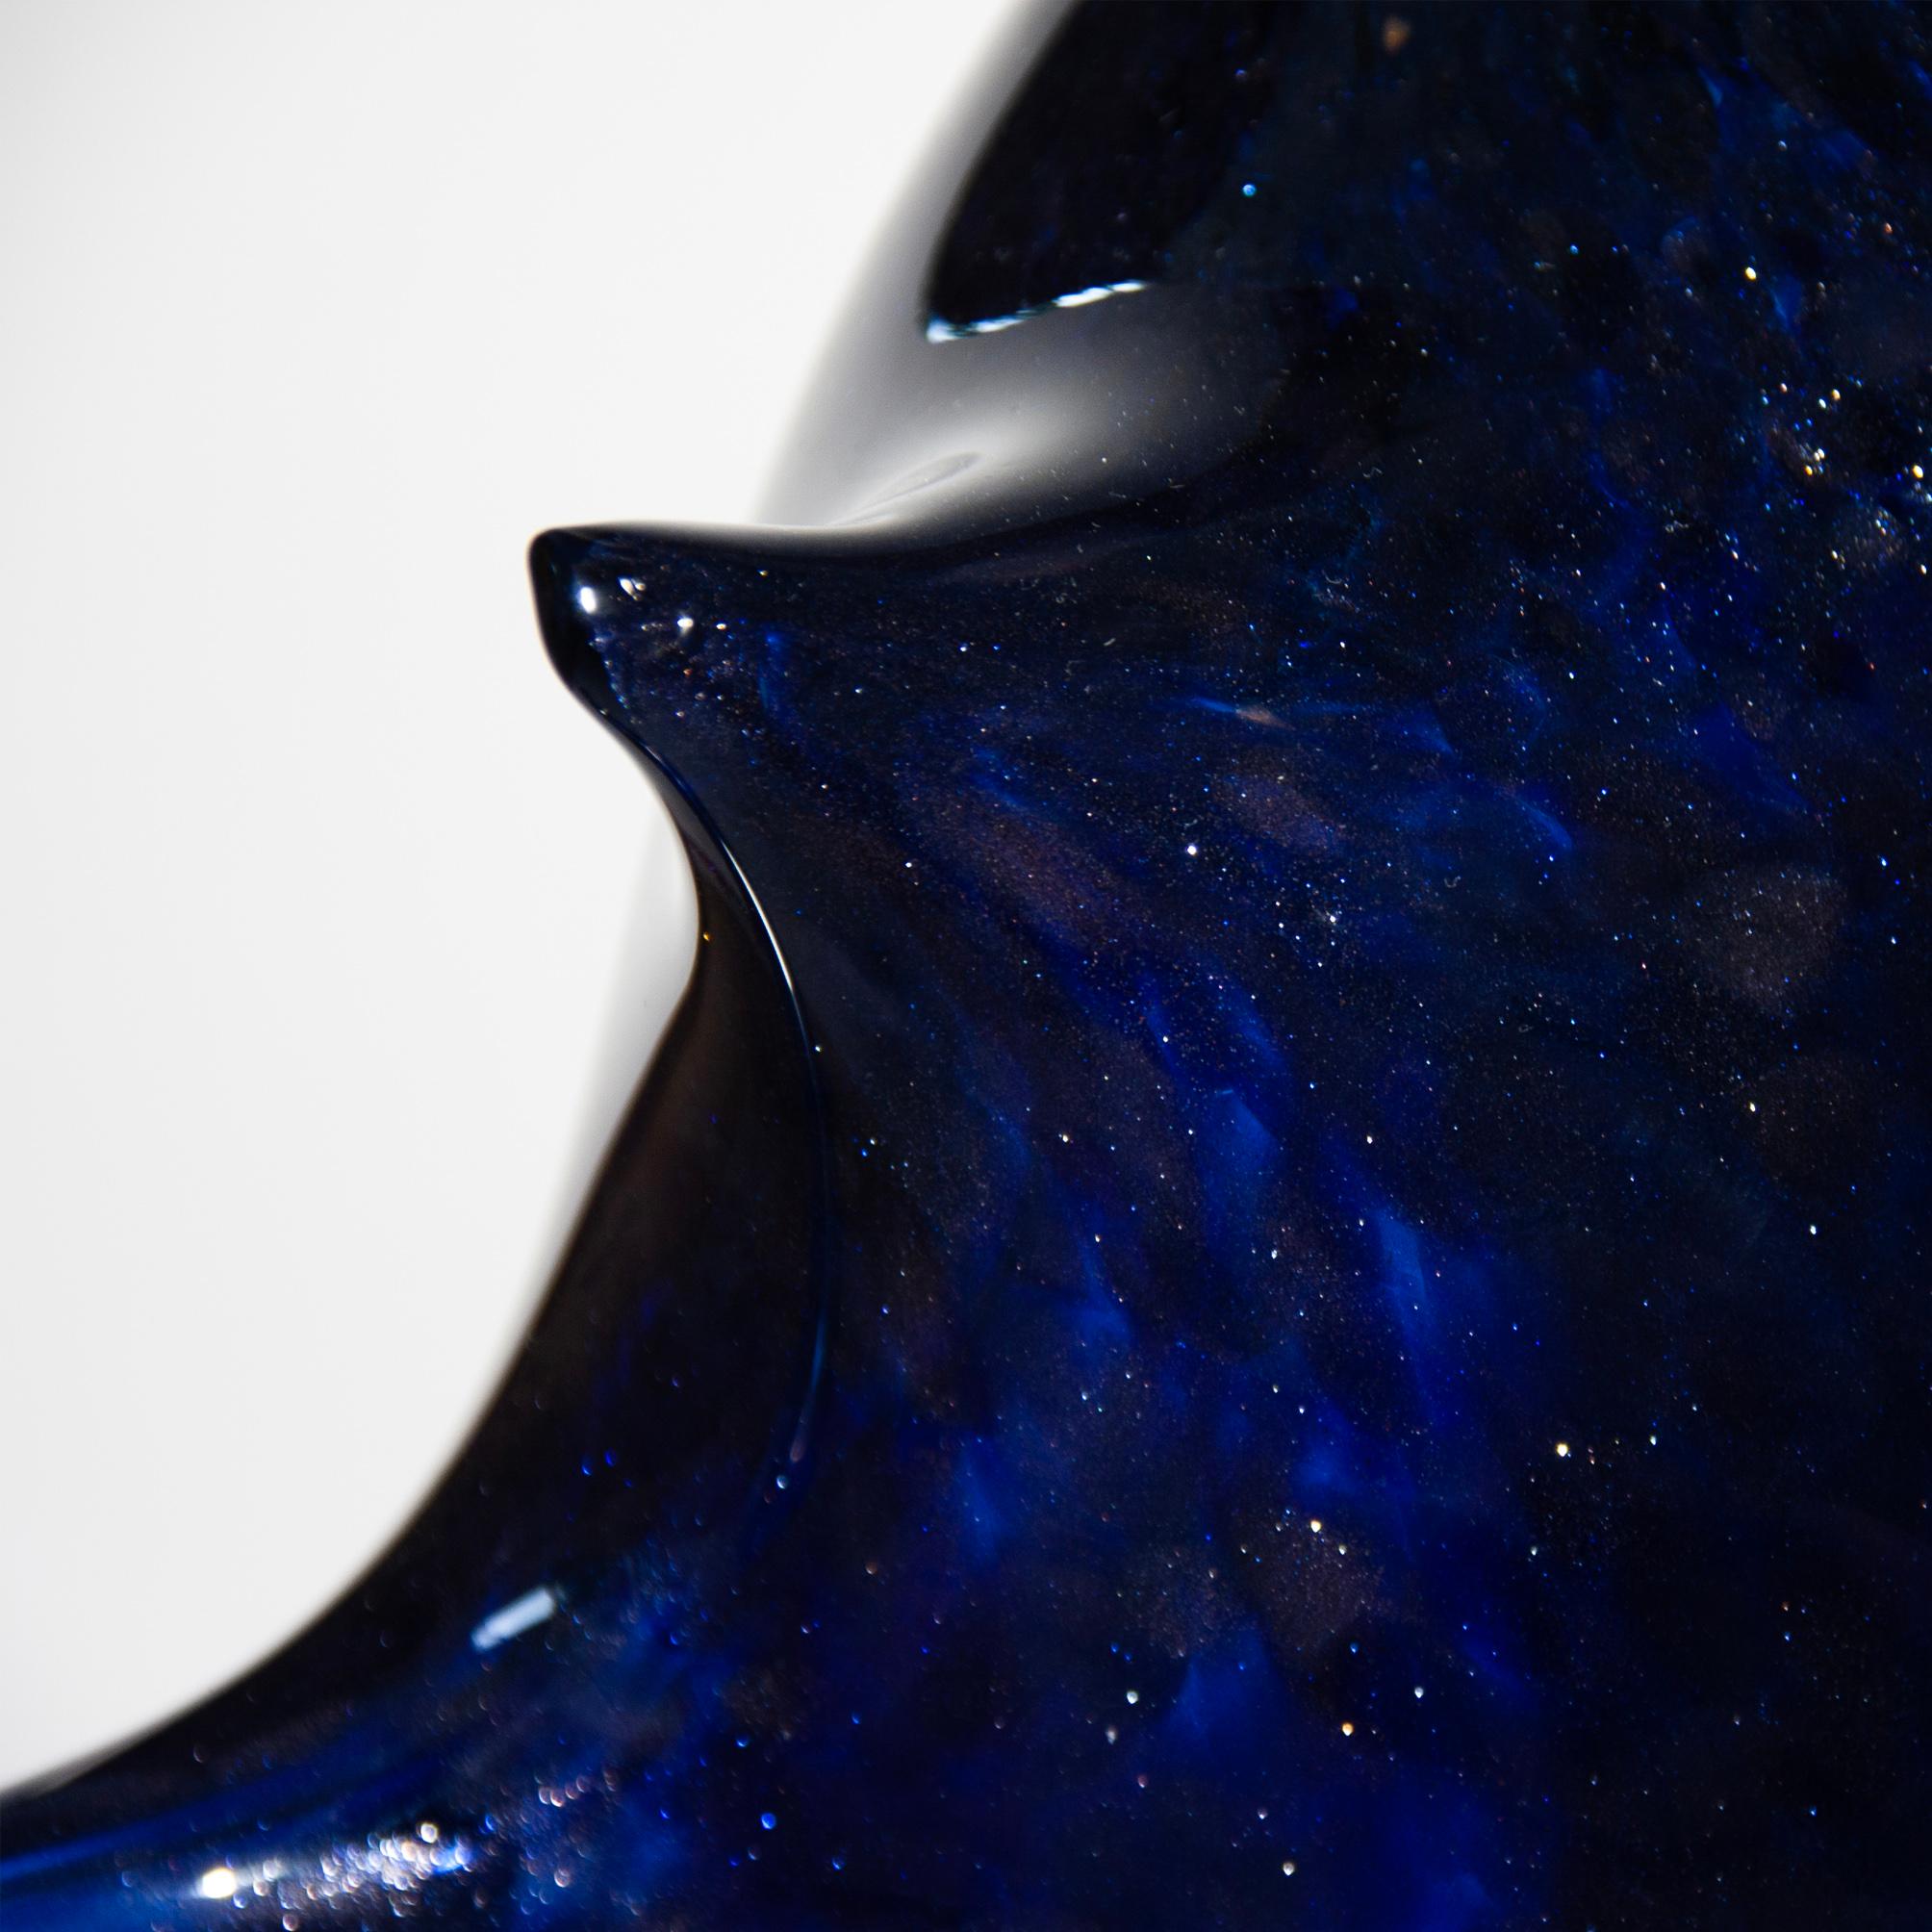 The spectacular Veloce vase is a one-of-a-kind sculpture from the Blast collection, available in fabulous Blue Avventurina glass. Design and technical experimentation, for Ermes, is the only possible way to express its visionary ideas. Blast is a